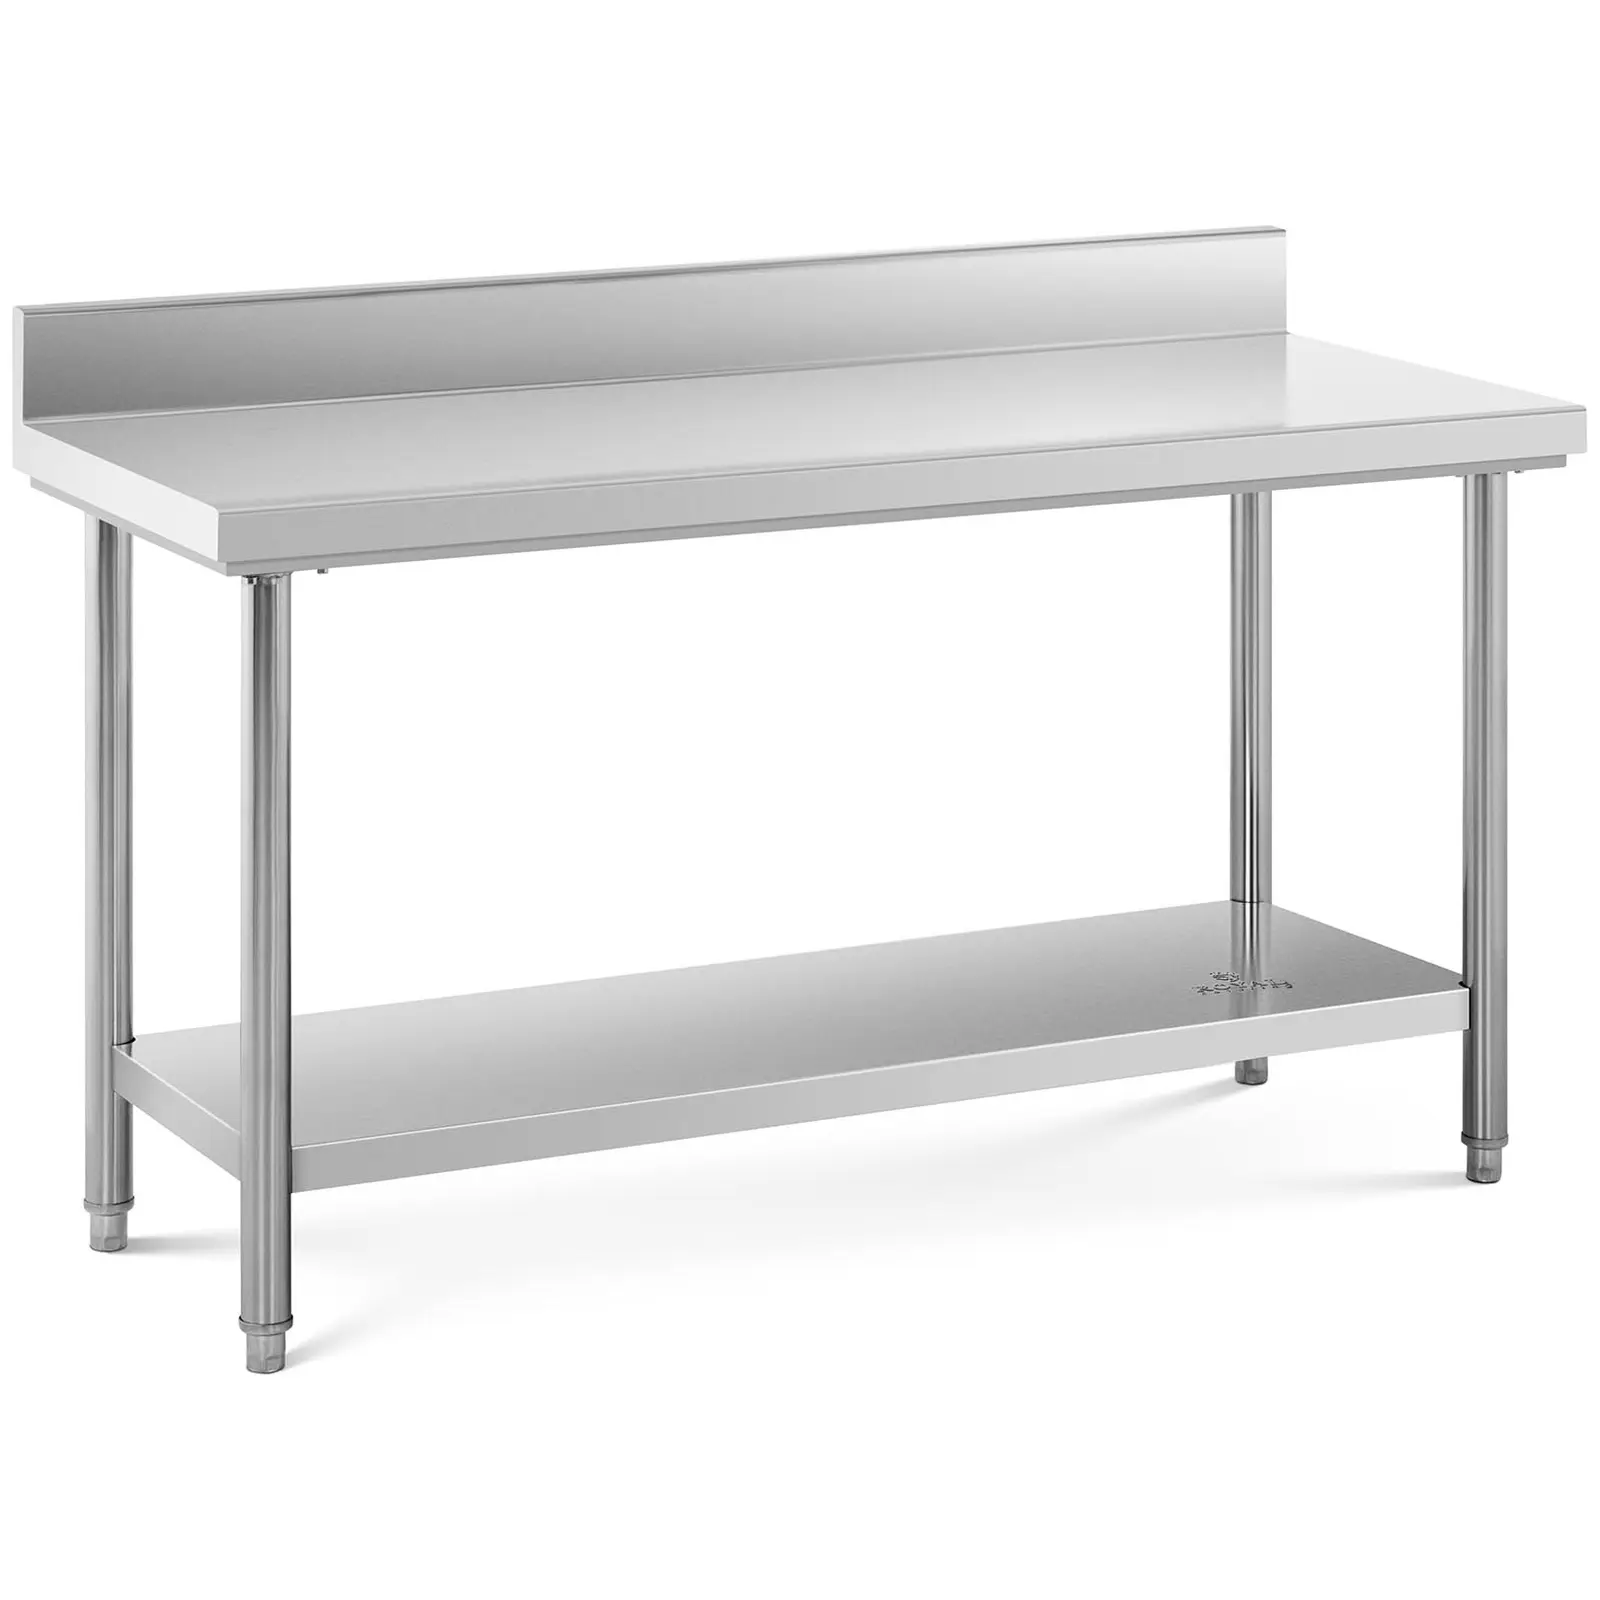 Stainless Steel Work Table - 150 x 60 cm - Royal Catering - upstand - 130 kg load capacity